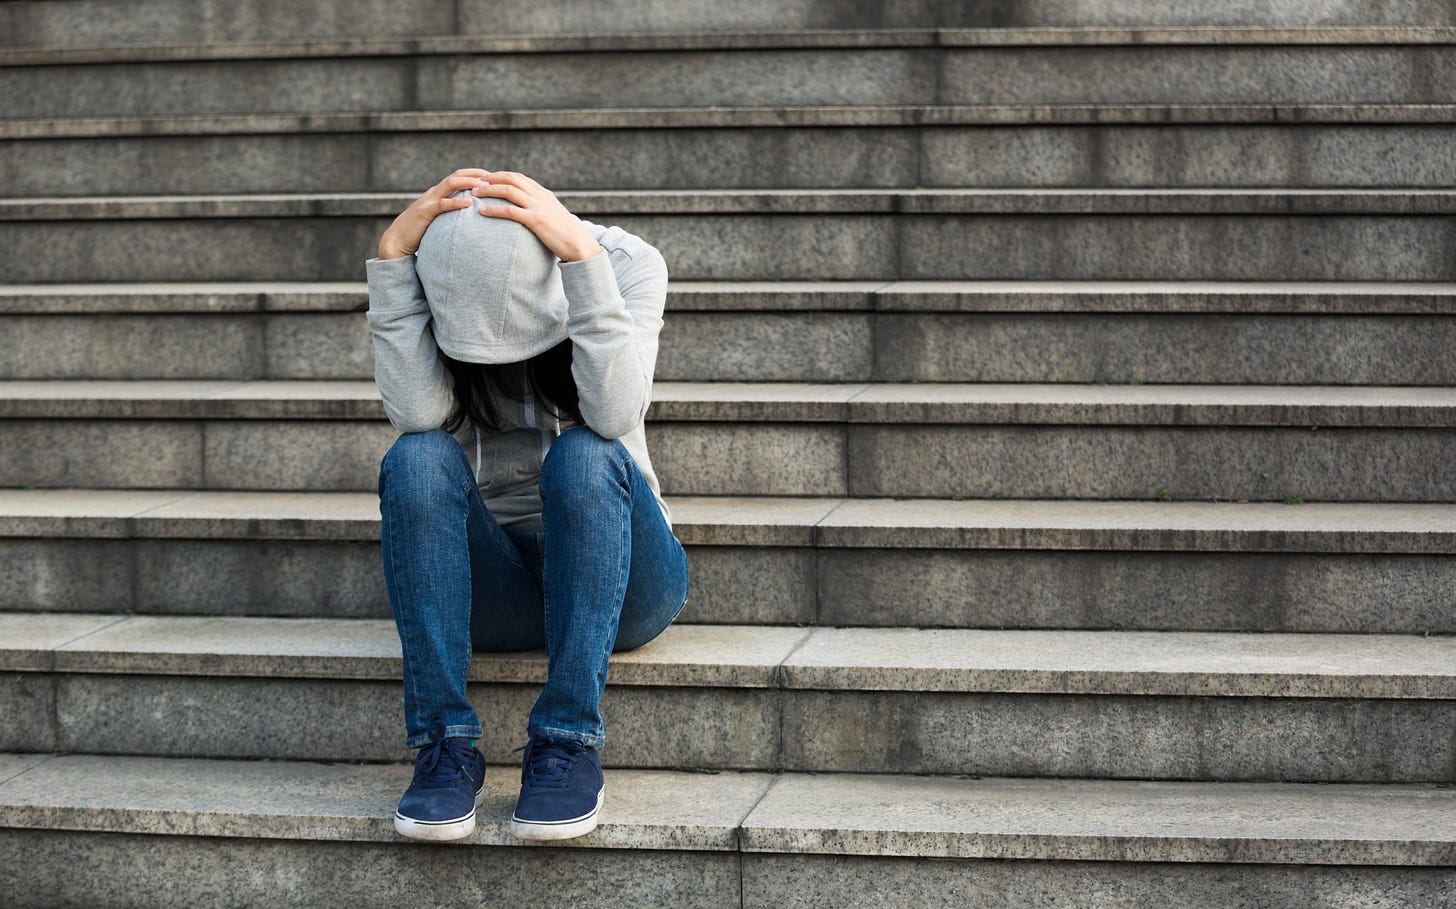 A woman sits sadly on stairs with her head in her hands and her hood pulled up.